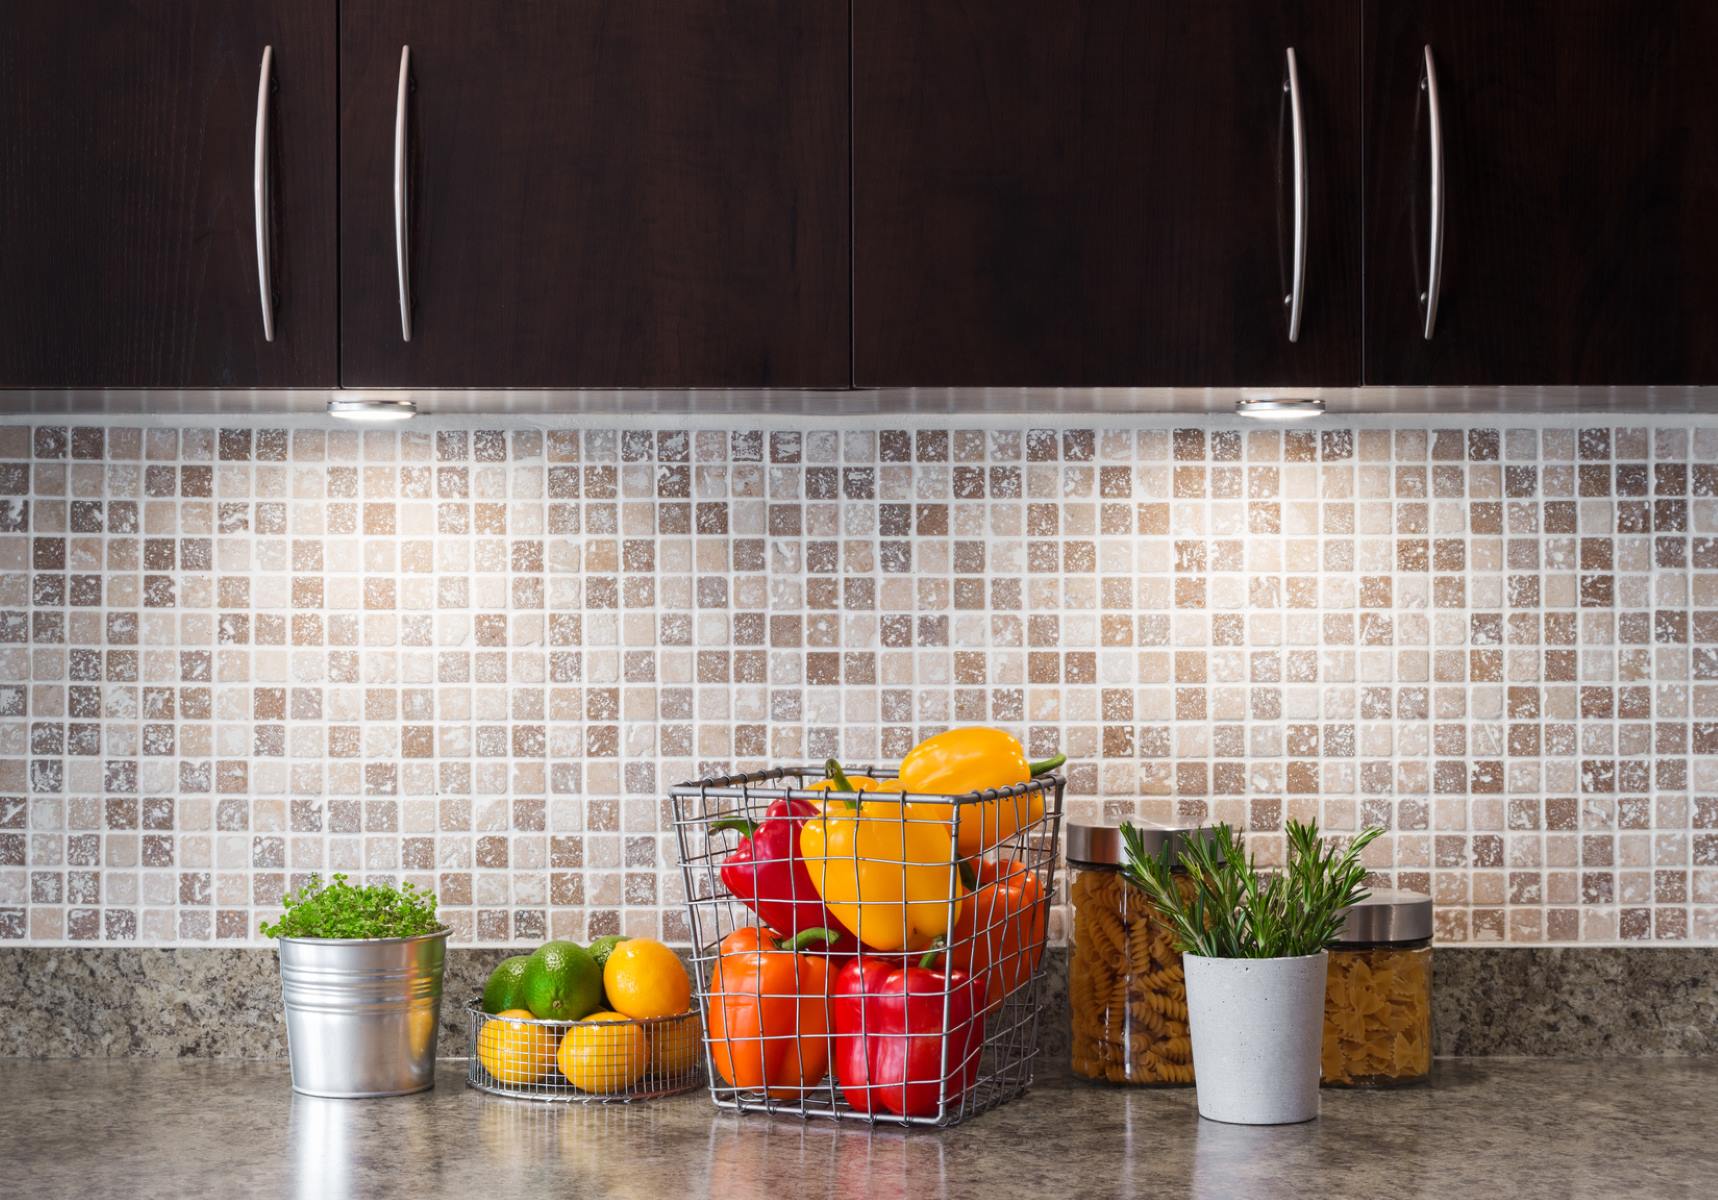 How To Put Up A Backsplash With Glass Tiles